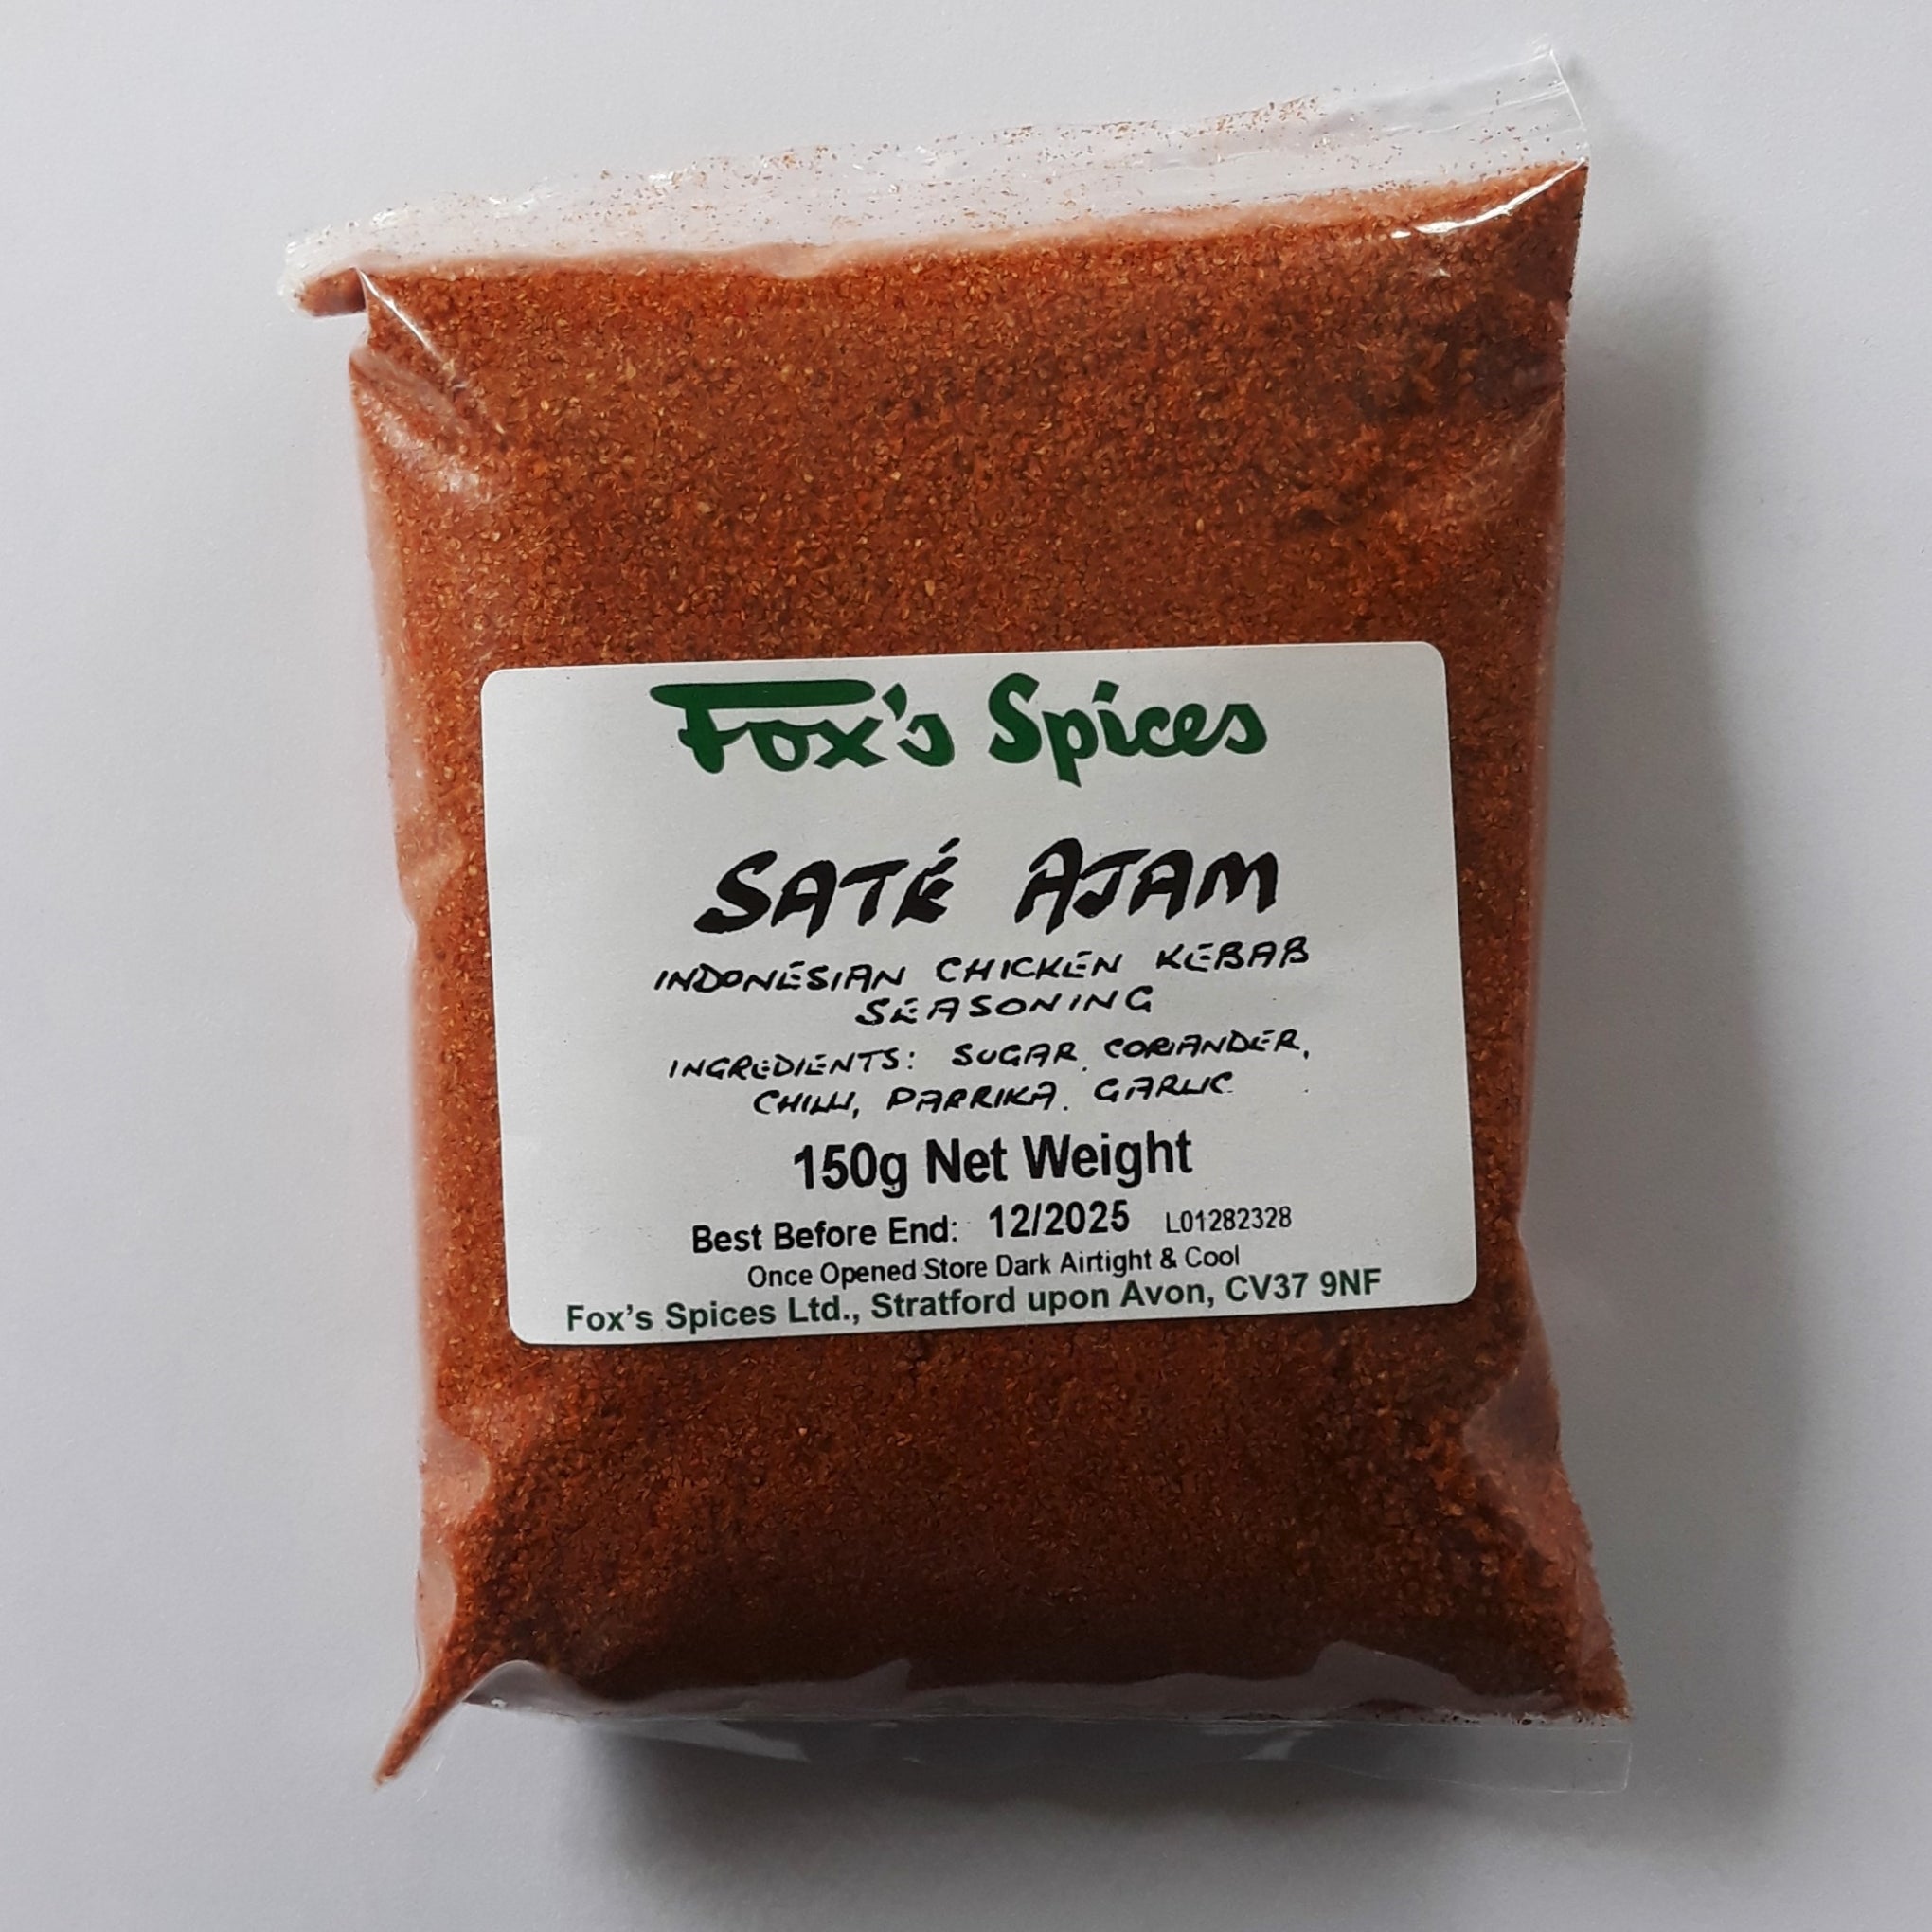 Fox's Spices Sate Ajam sold in 150g bags.